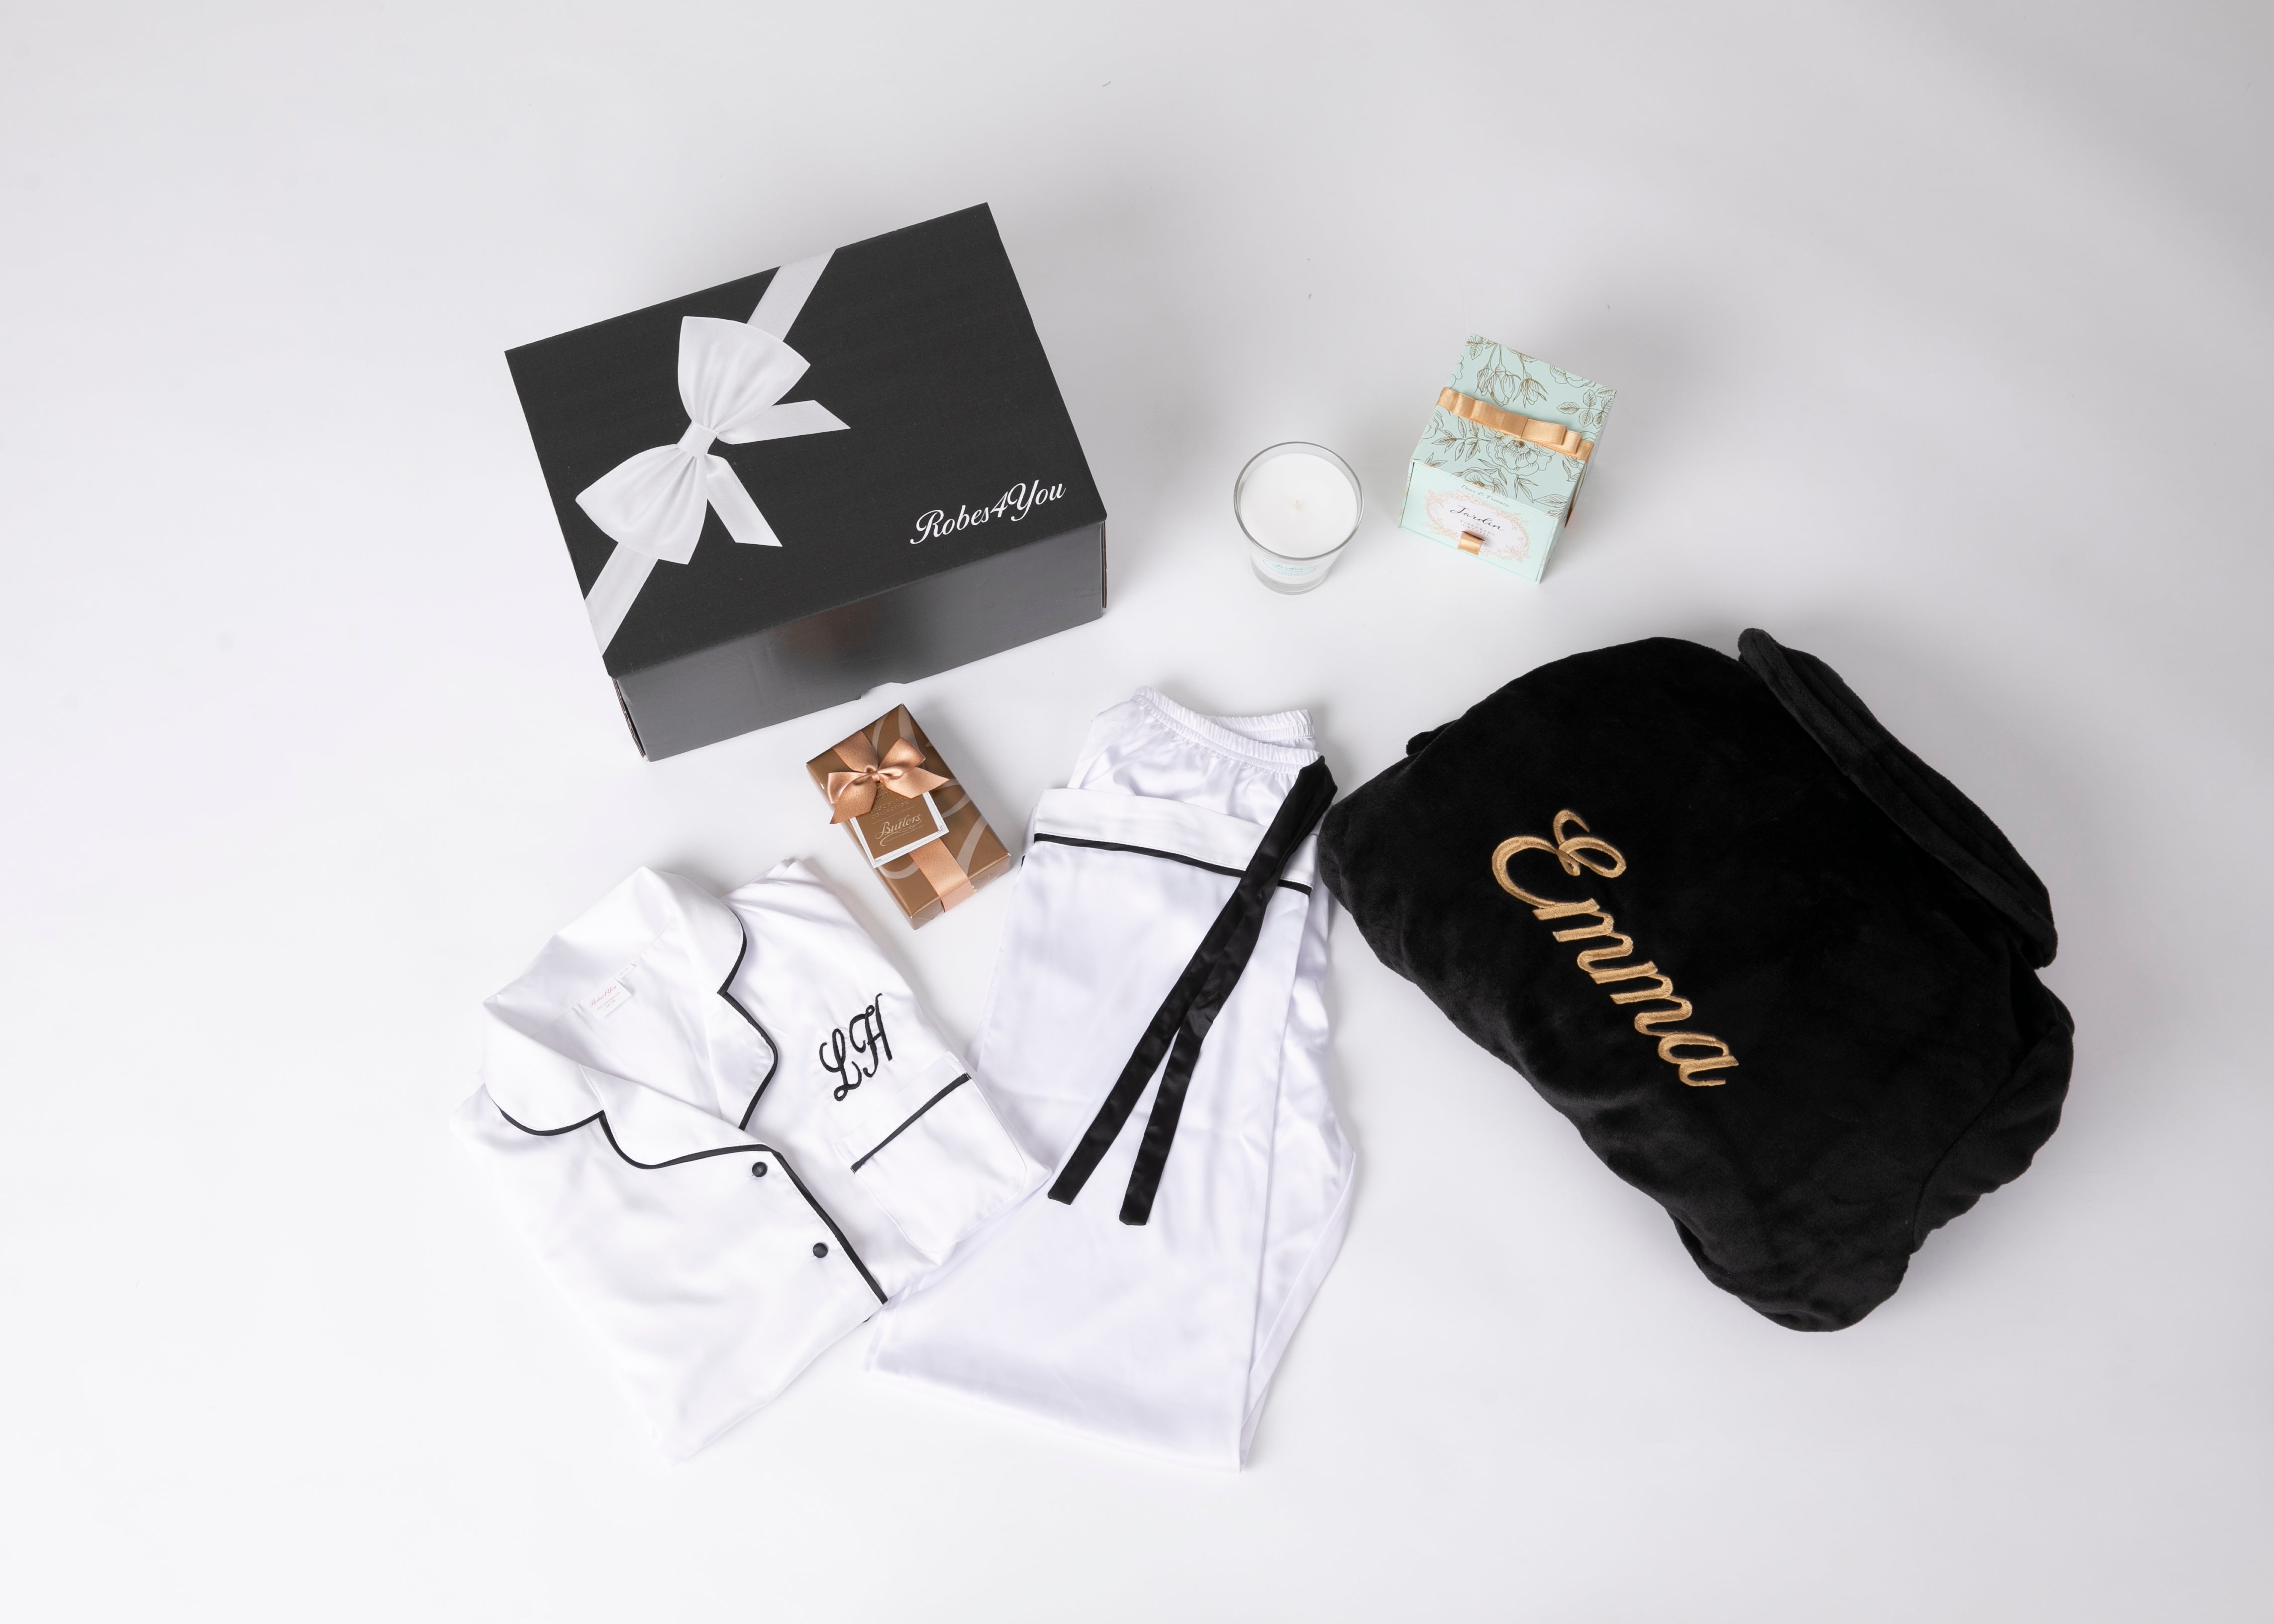 Luxurious Soft Fluffy Robe and Long Satin pyjamas with candle and chocolates presented in a gift box